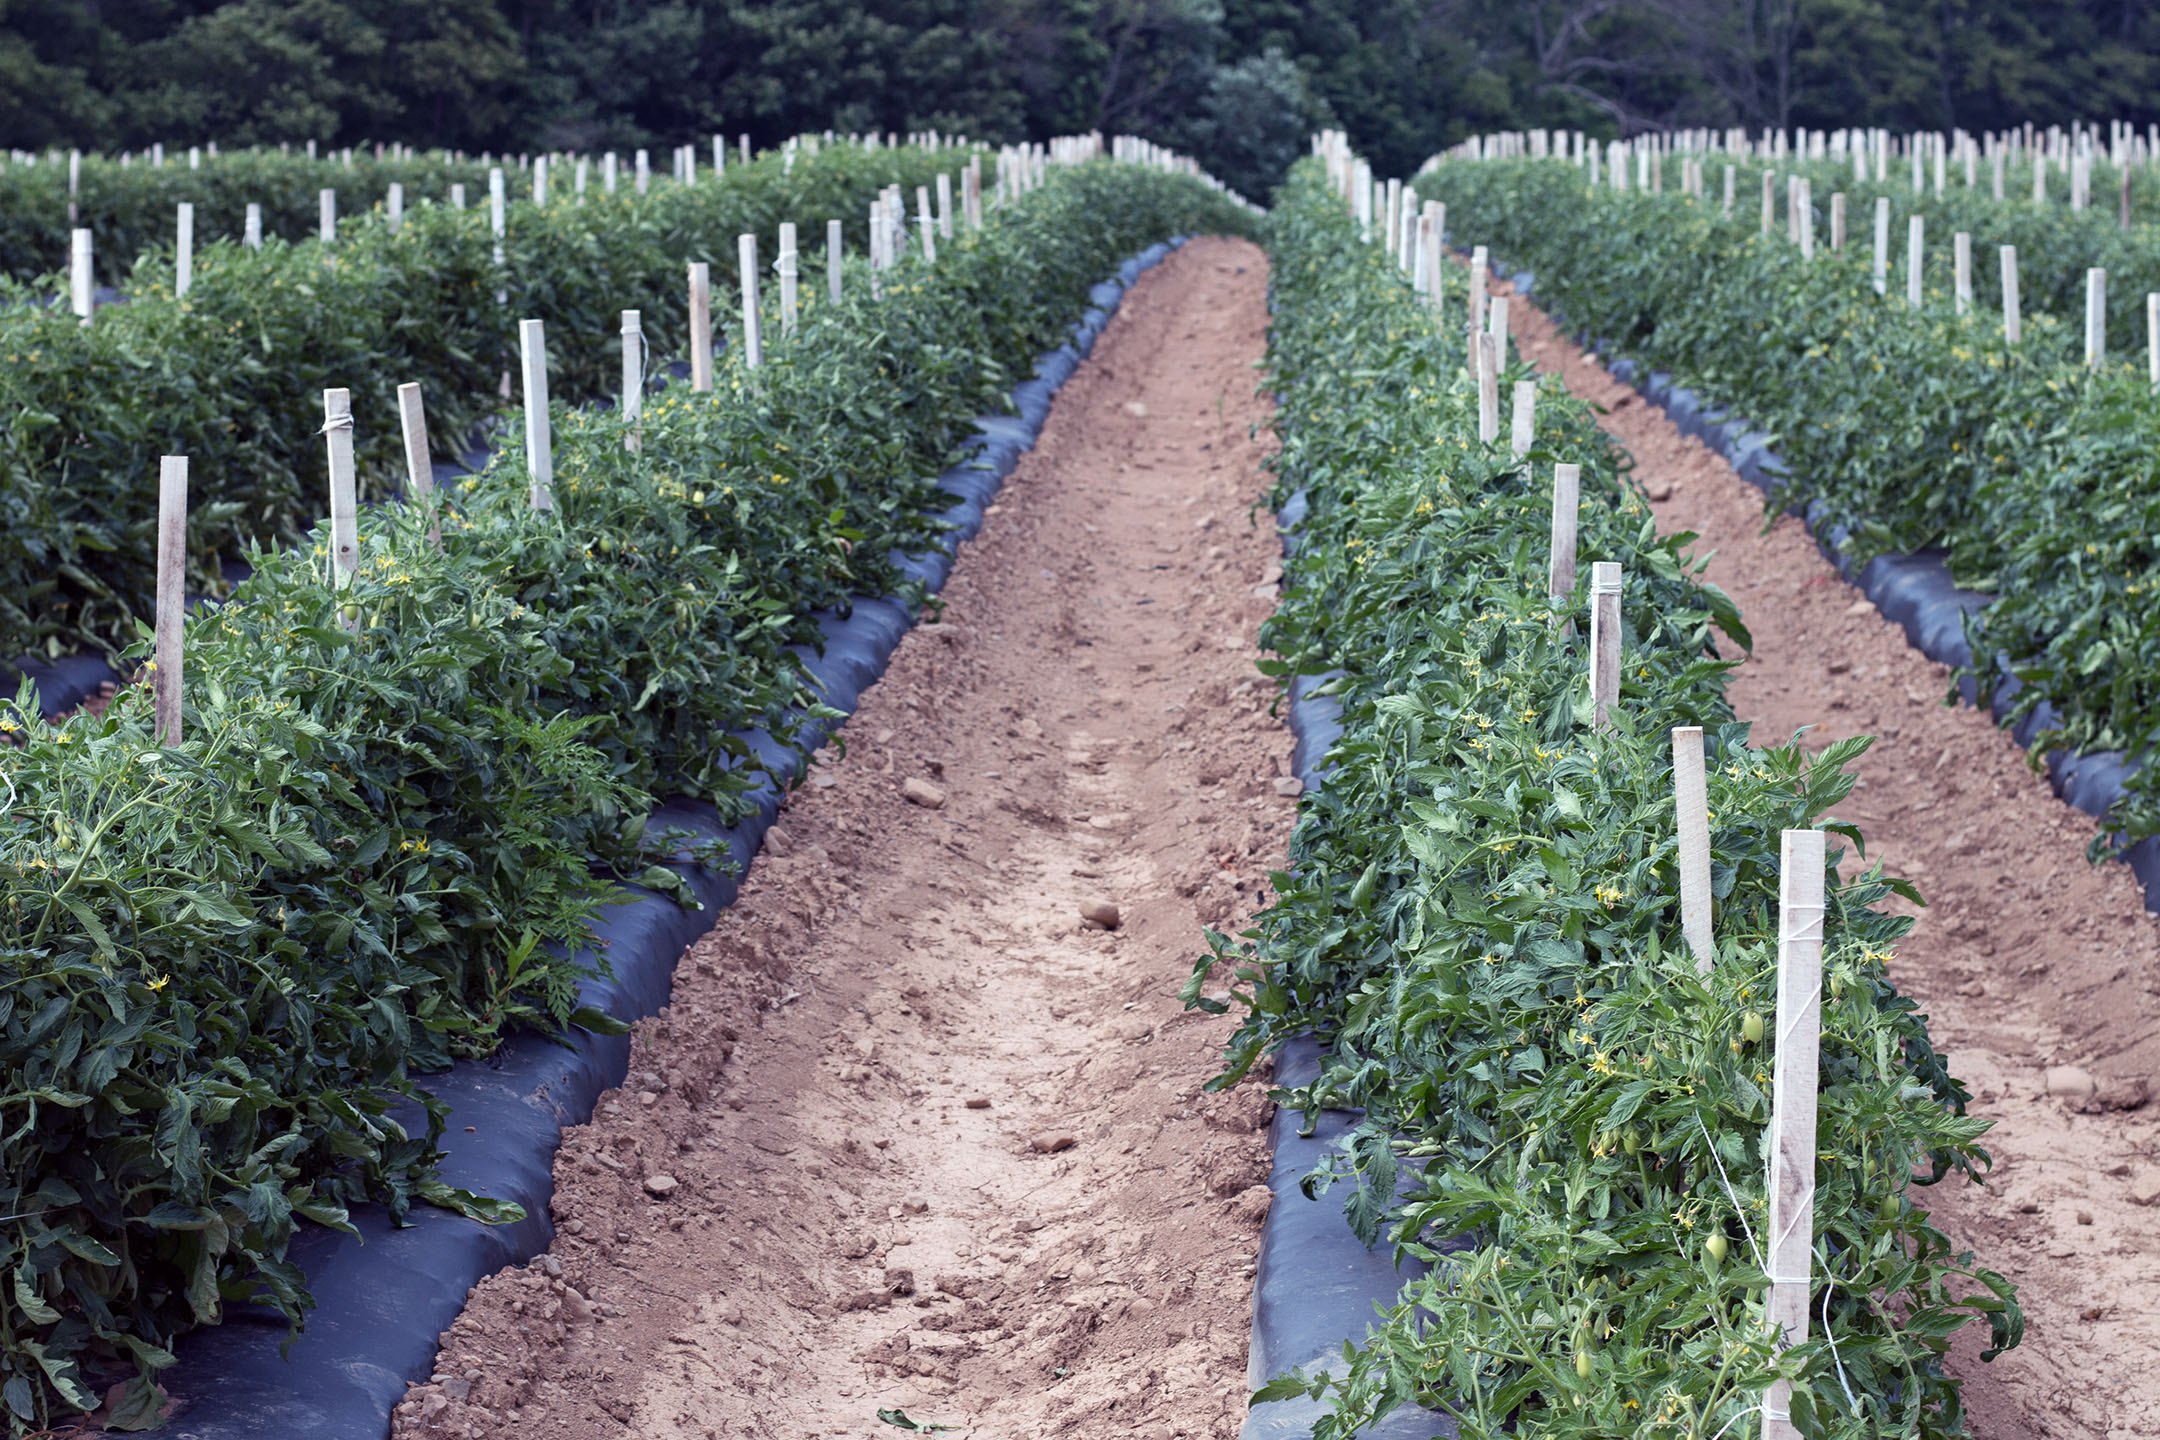 Rows of tomatoes planted in raised beds and black plastic mulch at Cecarelli Farms on July 13th, 2018.